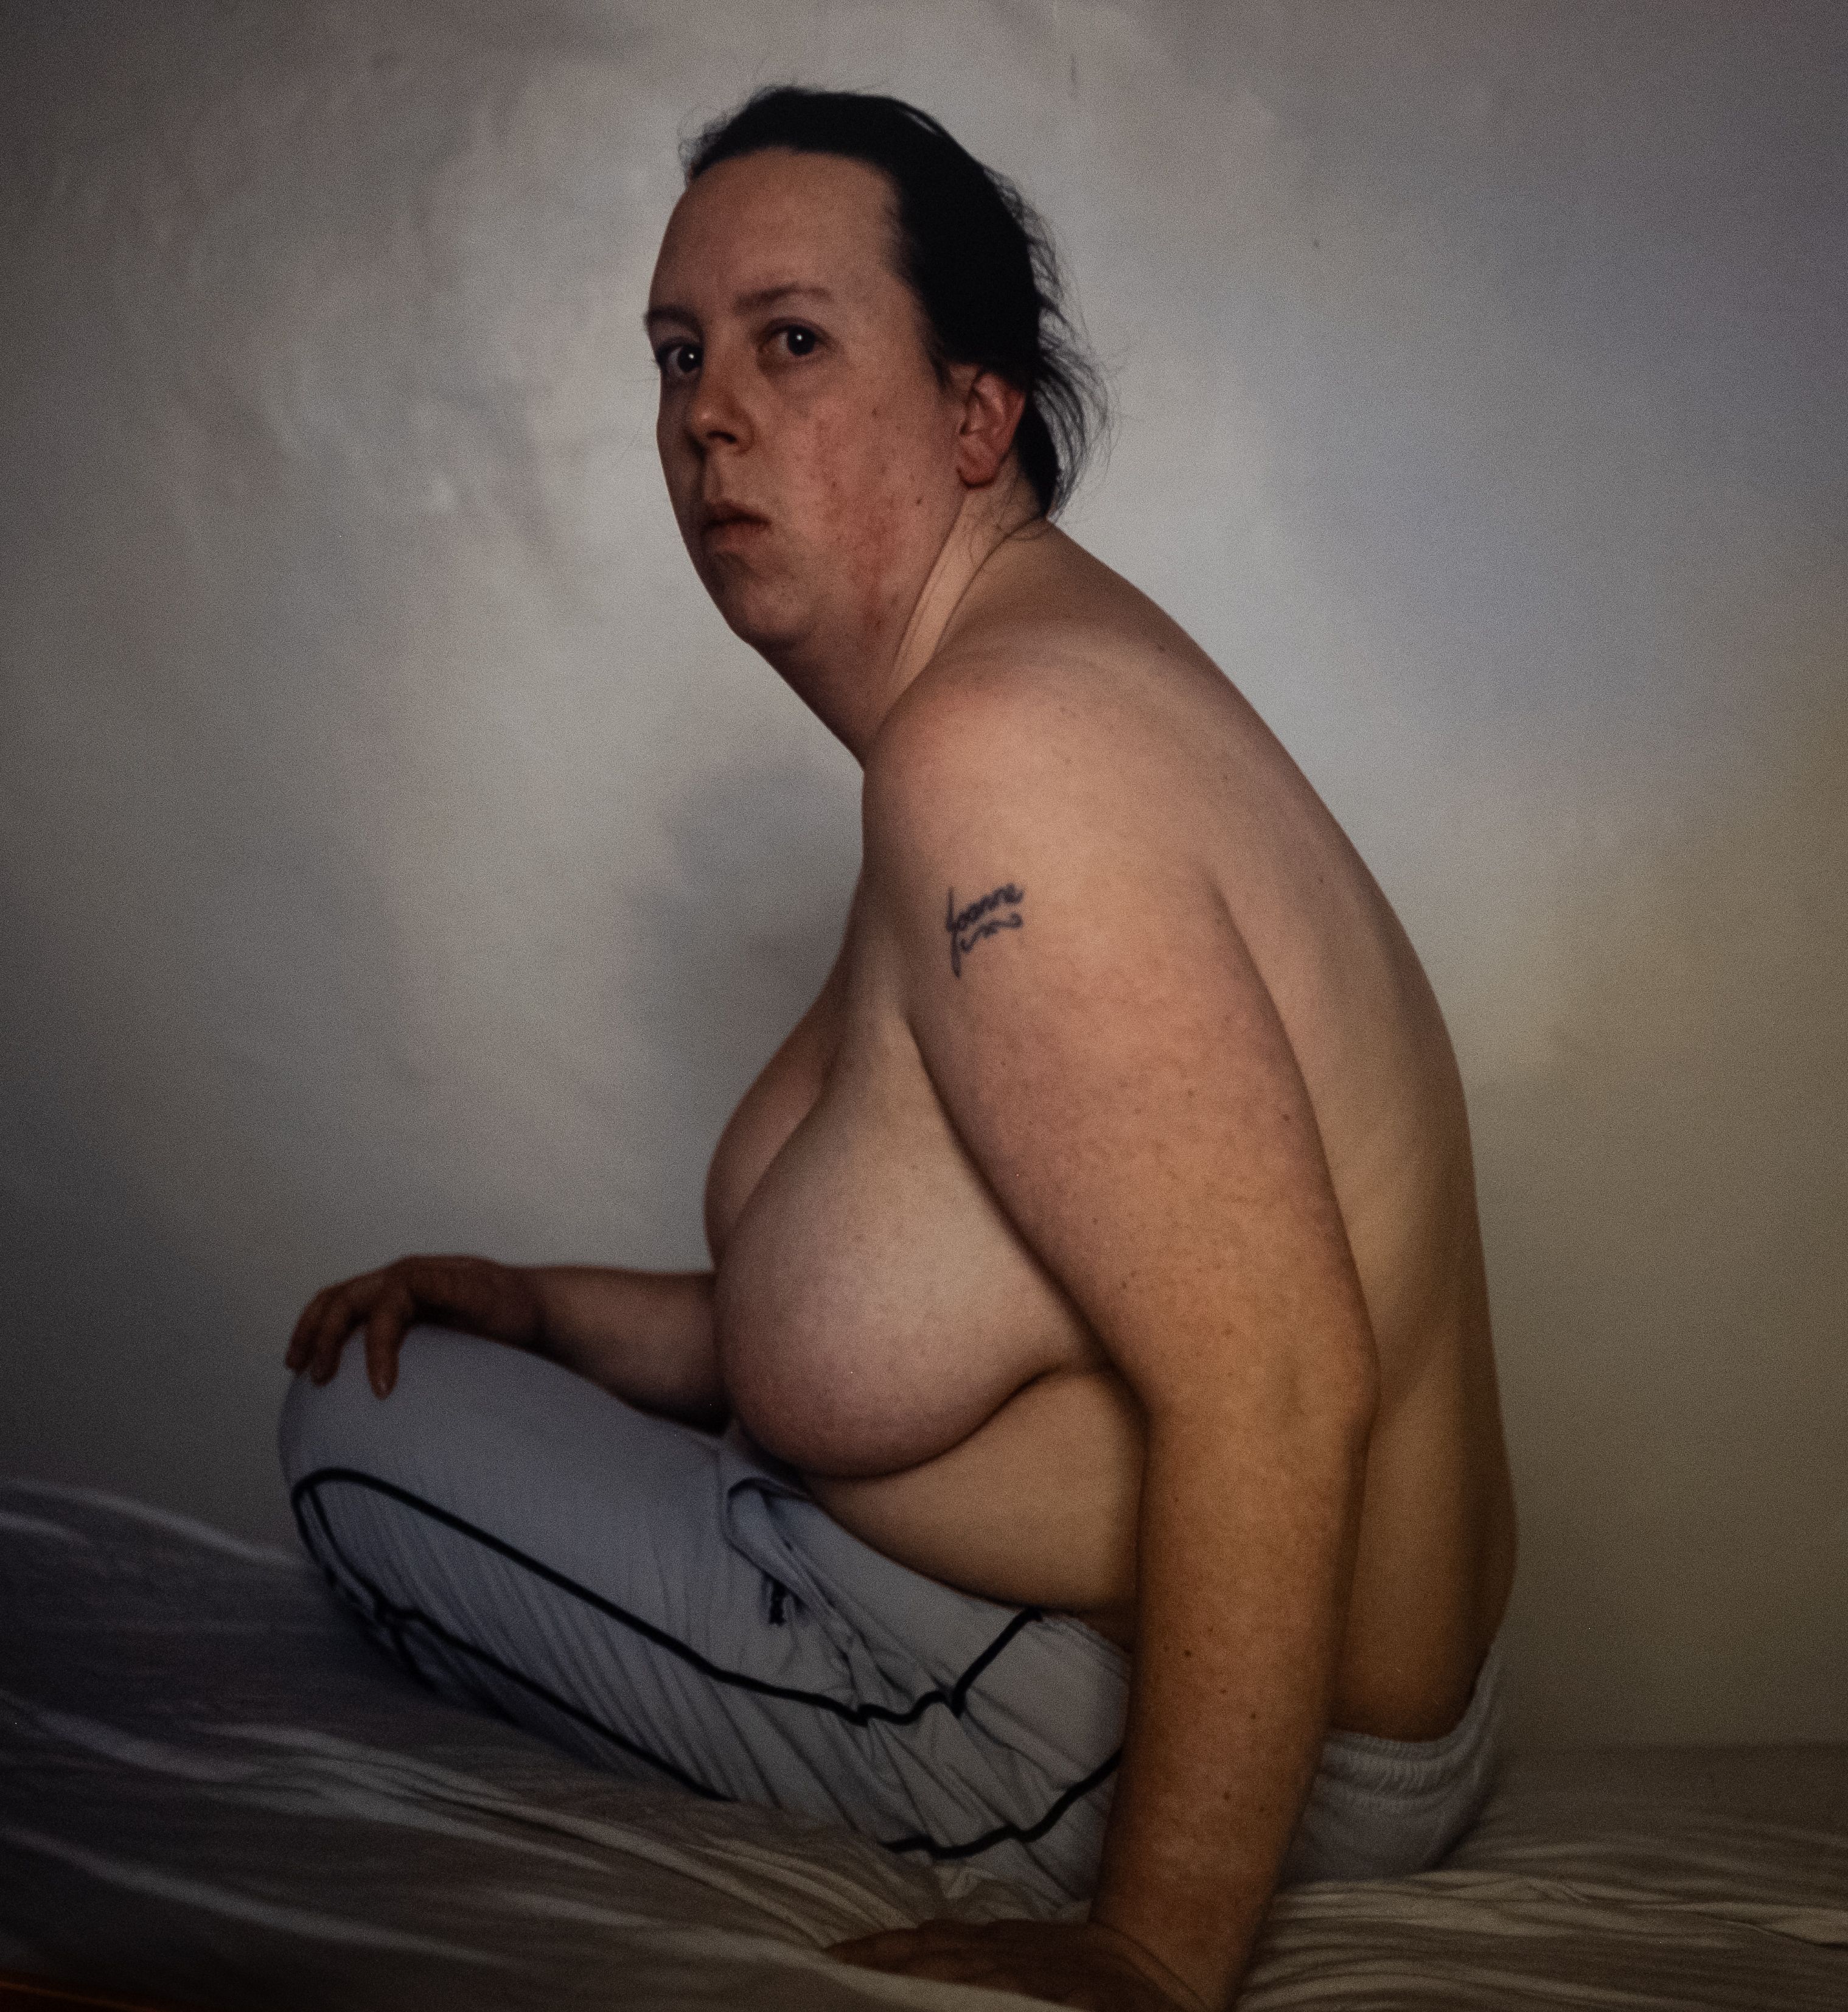 Joanne – A photograph of a topless women sitting on a bed, side profile. She has a tattoo on her upper arm reading ‘Joanne’ and wears white tracksuit trousers.